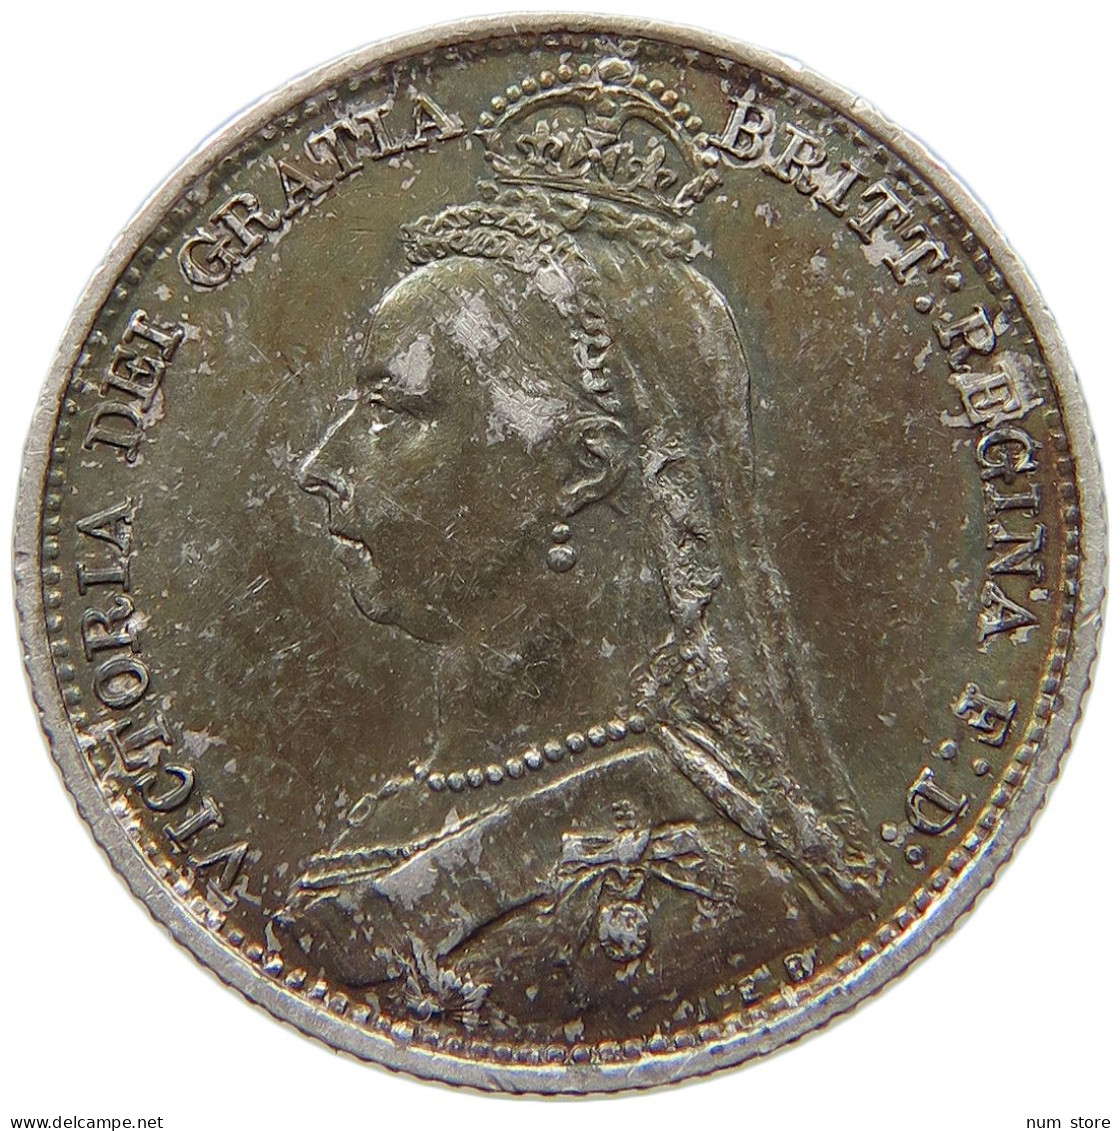 GREAT BRITAIN SIXPENCE 1891 Victoria 1837-1901 #t075 0391 - H. 6 Pence